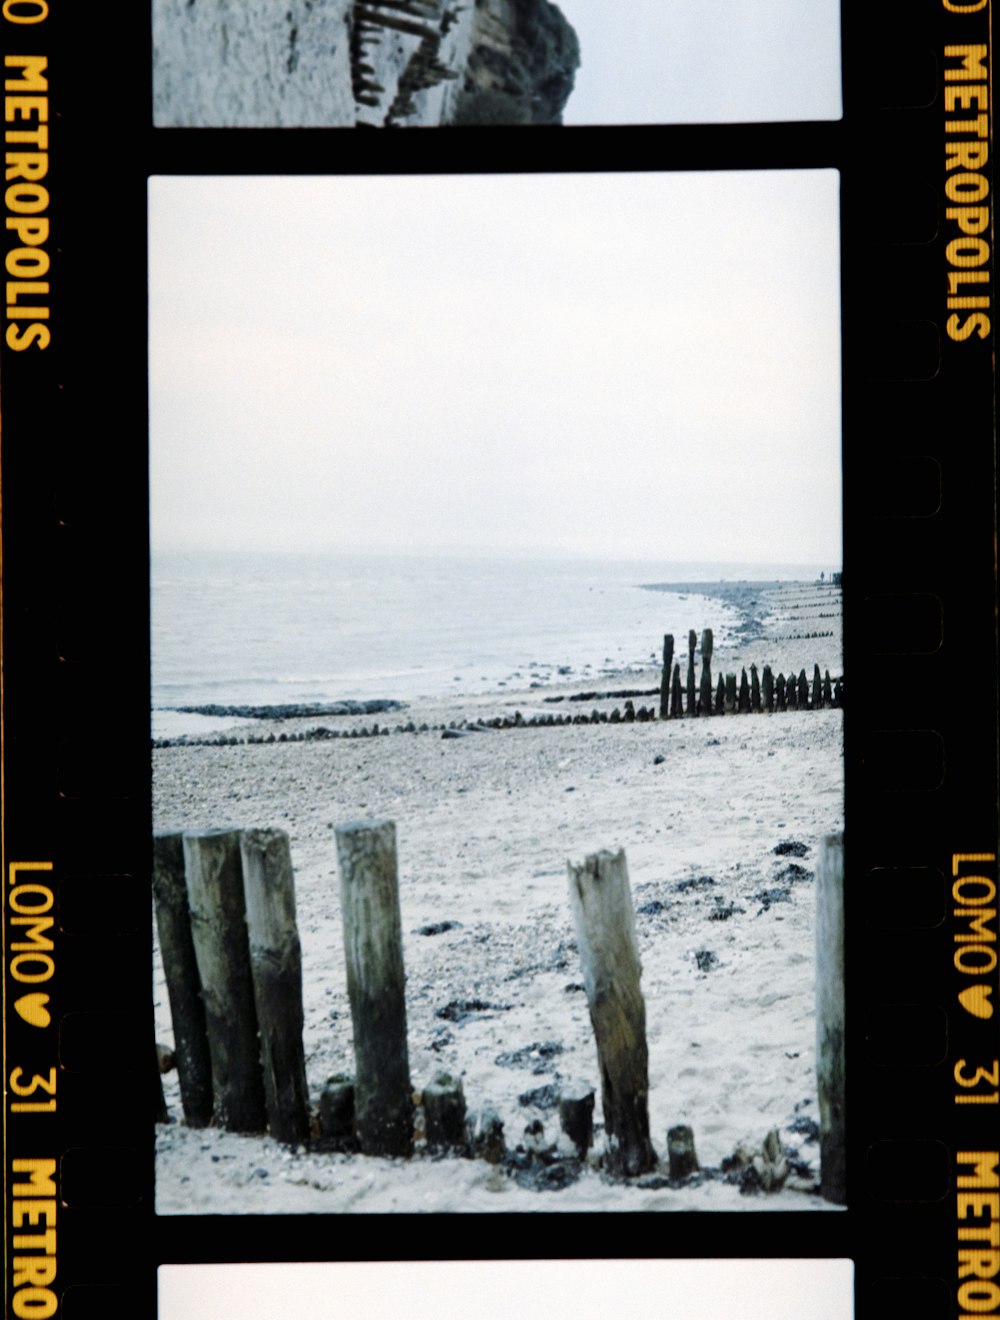 a polaroid picture of a person standing on a beach